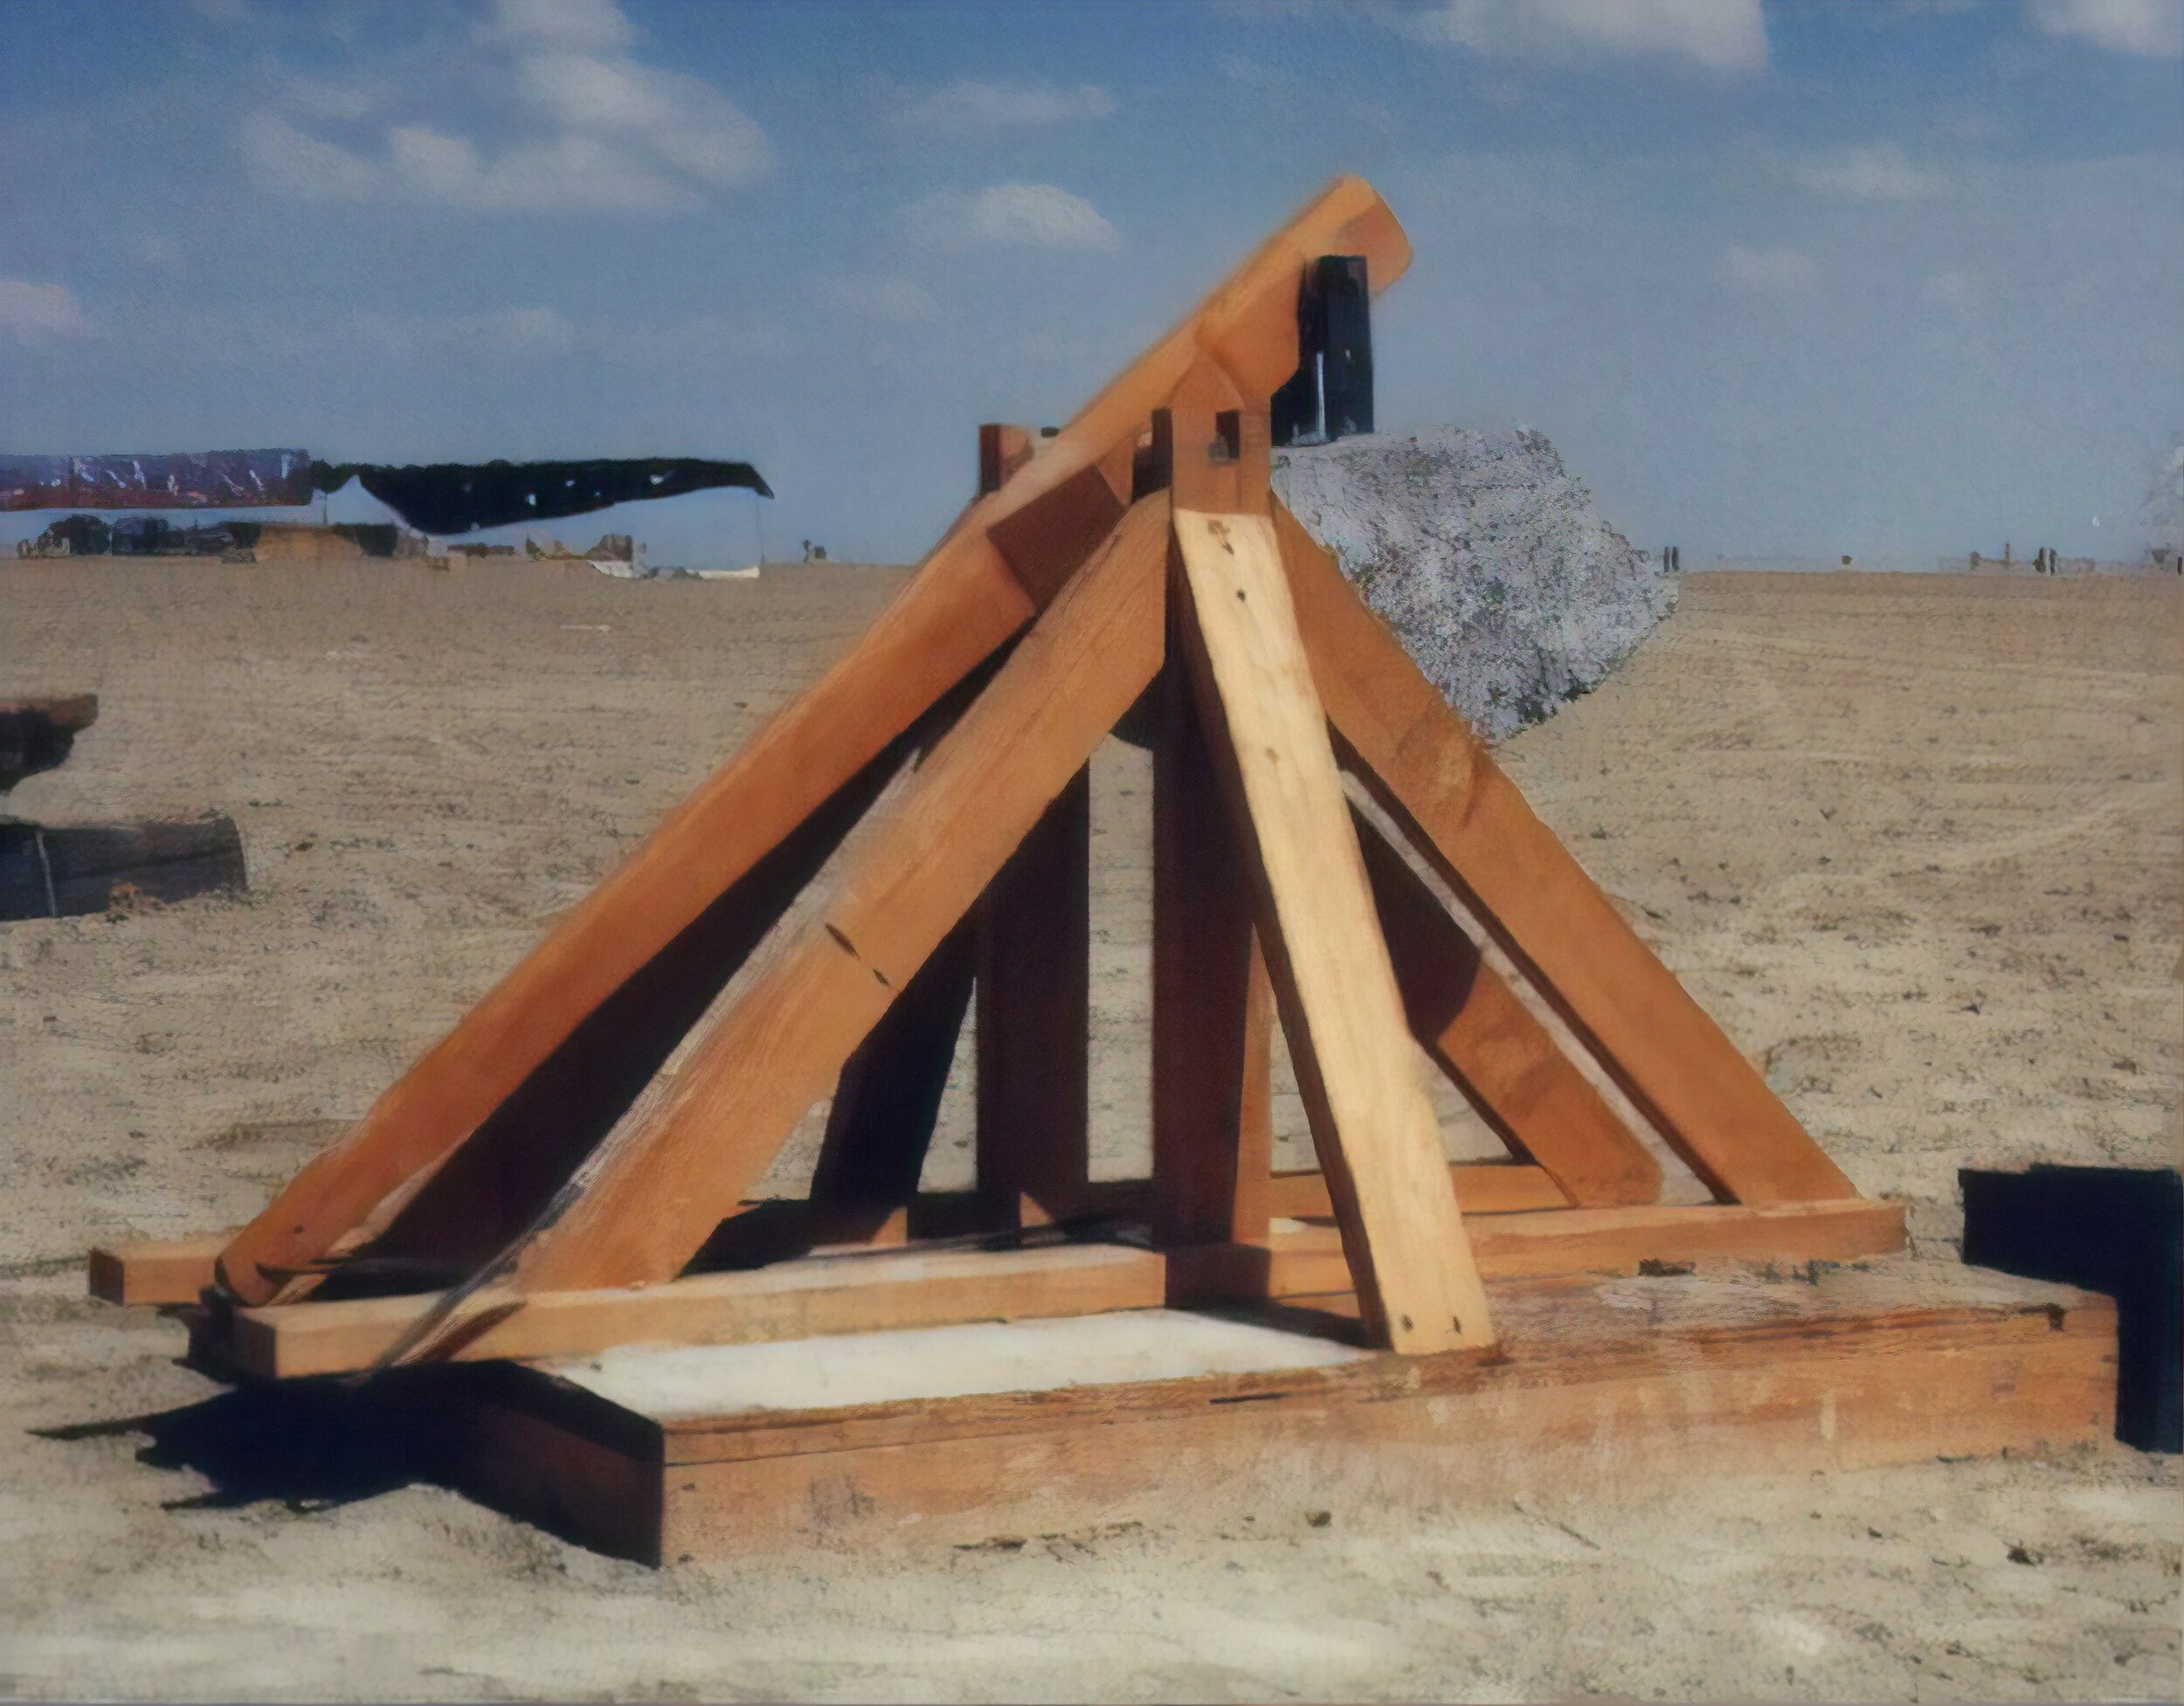  I brought my little  trebuchet  out to the playa. It throws one pound lead balls 145 feet with good accuracy. I thought this would be a semi-original idea but it turned out that there were three bigger ones out there too. It performed very well unti